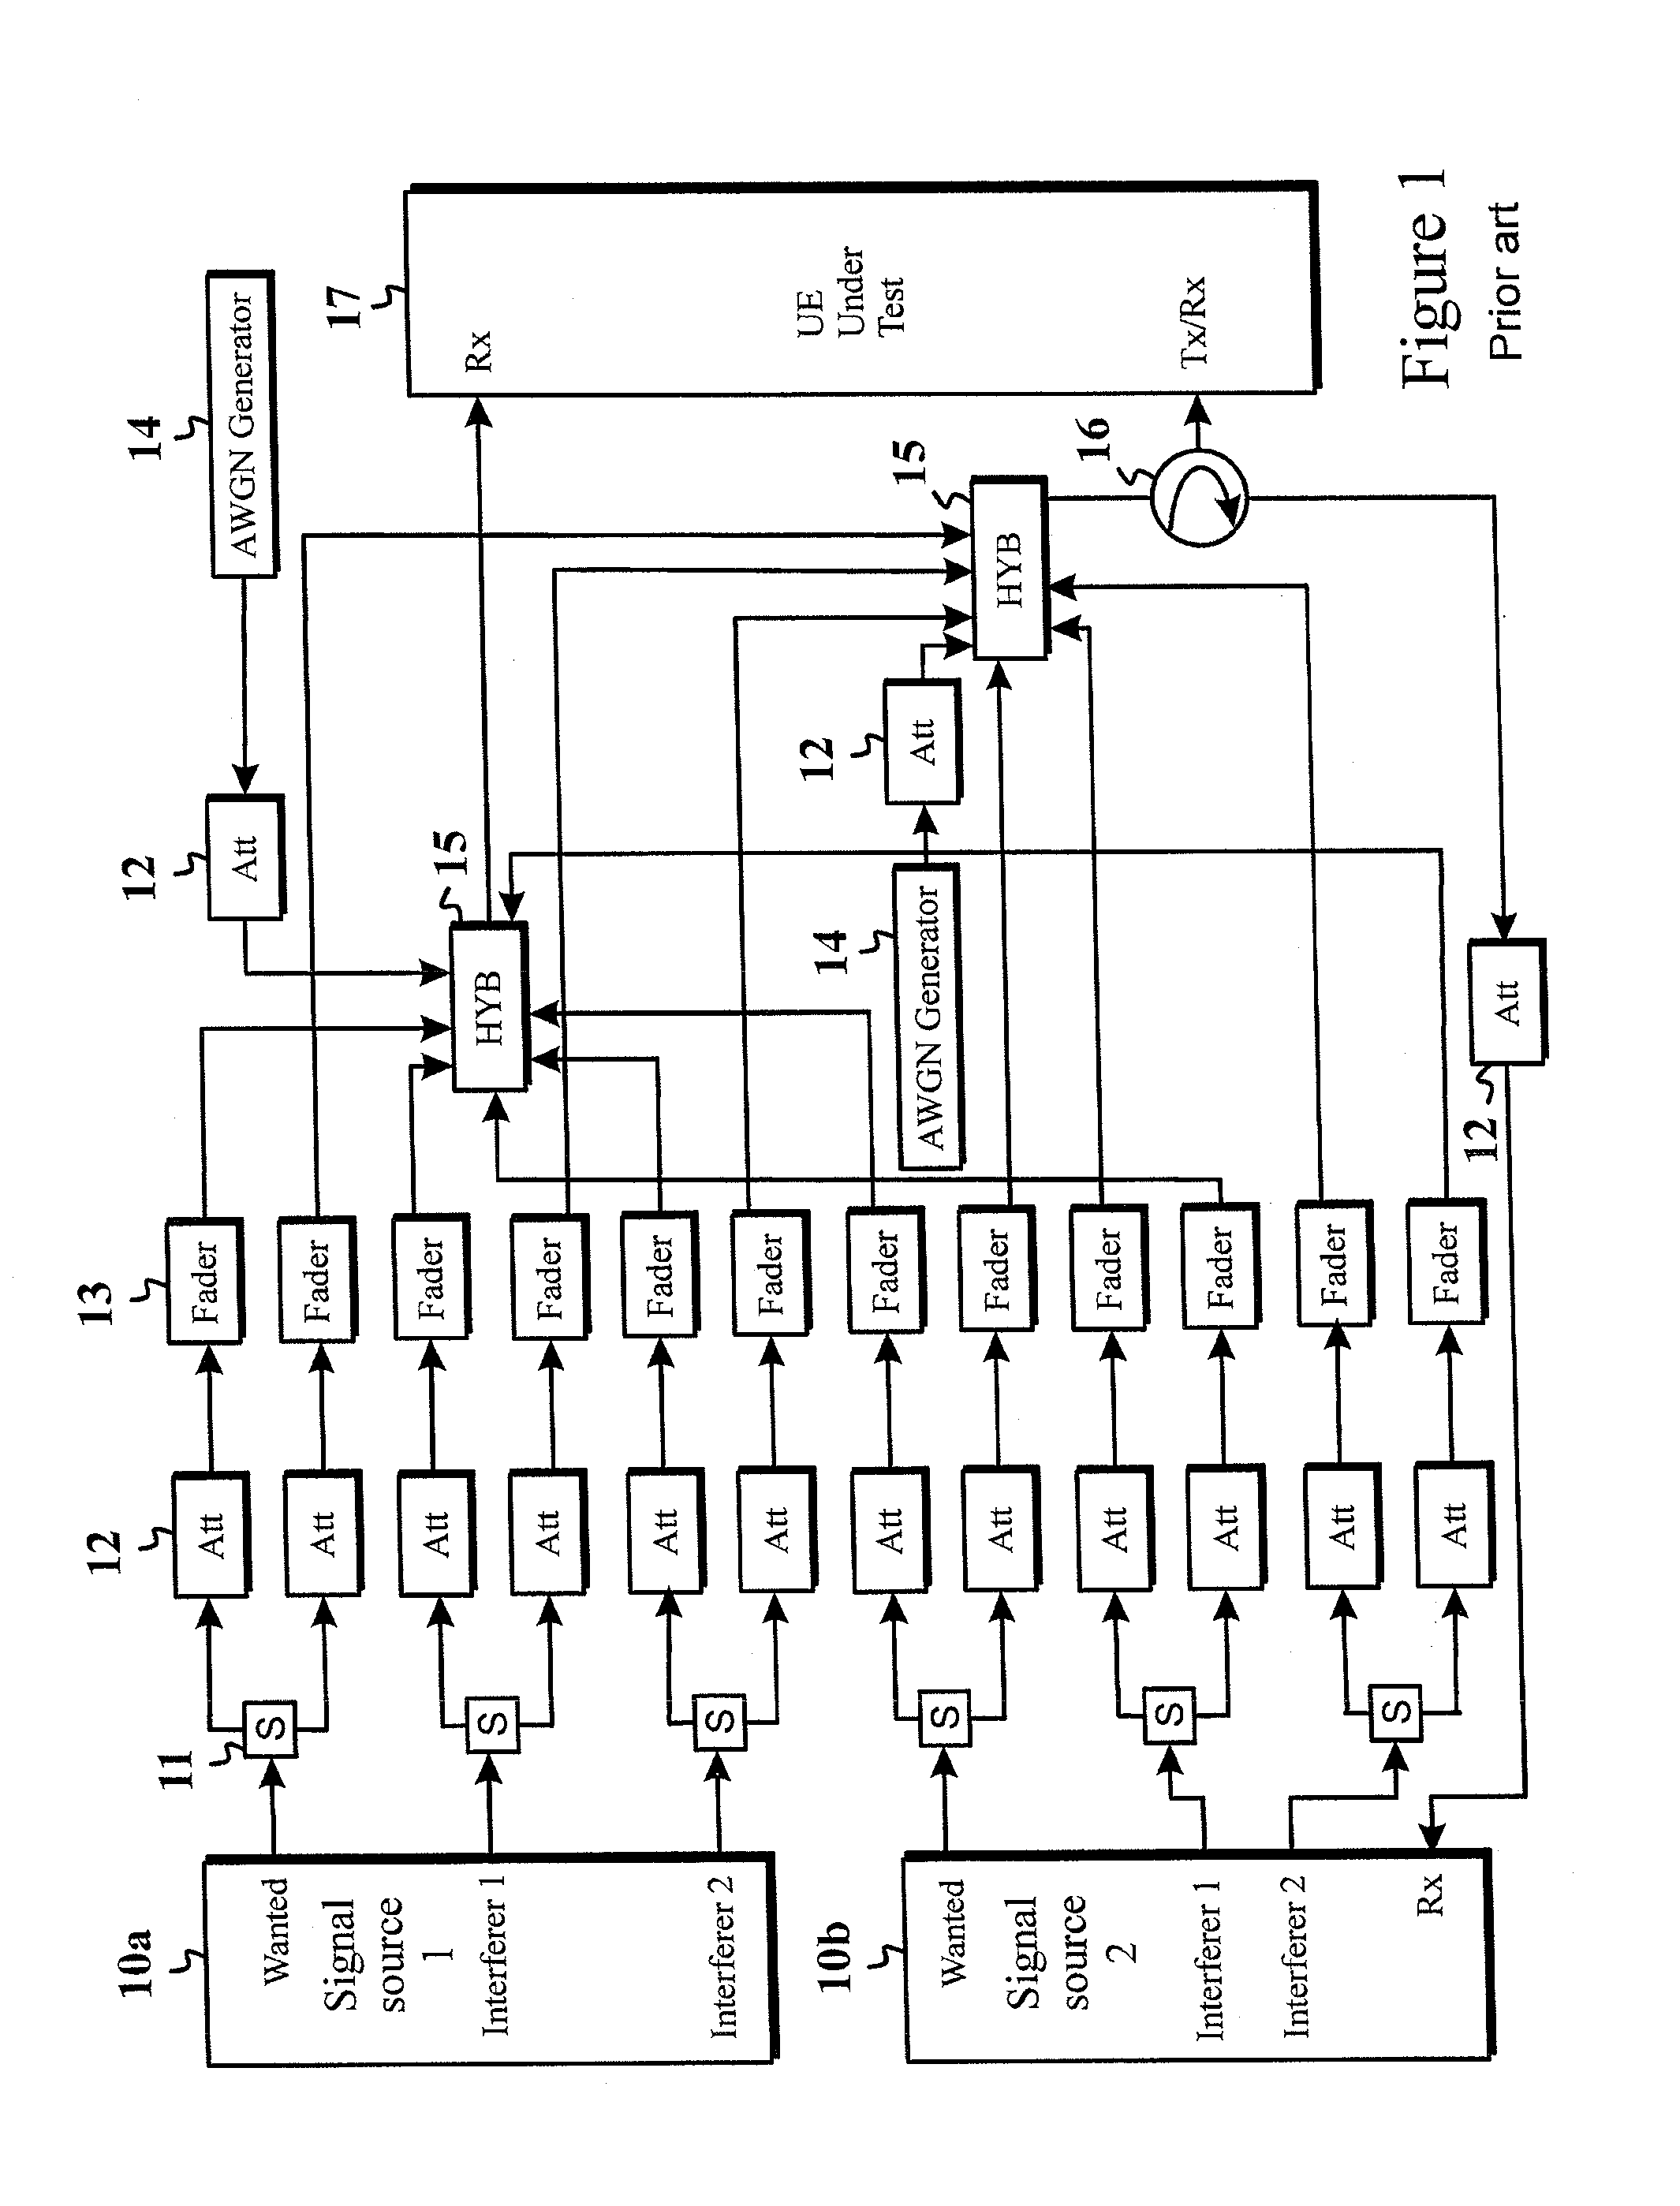 Test Method for Type 3I Receiver in Multicarrier Configuration